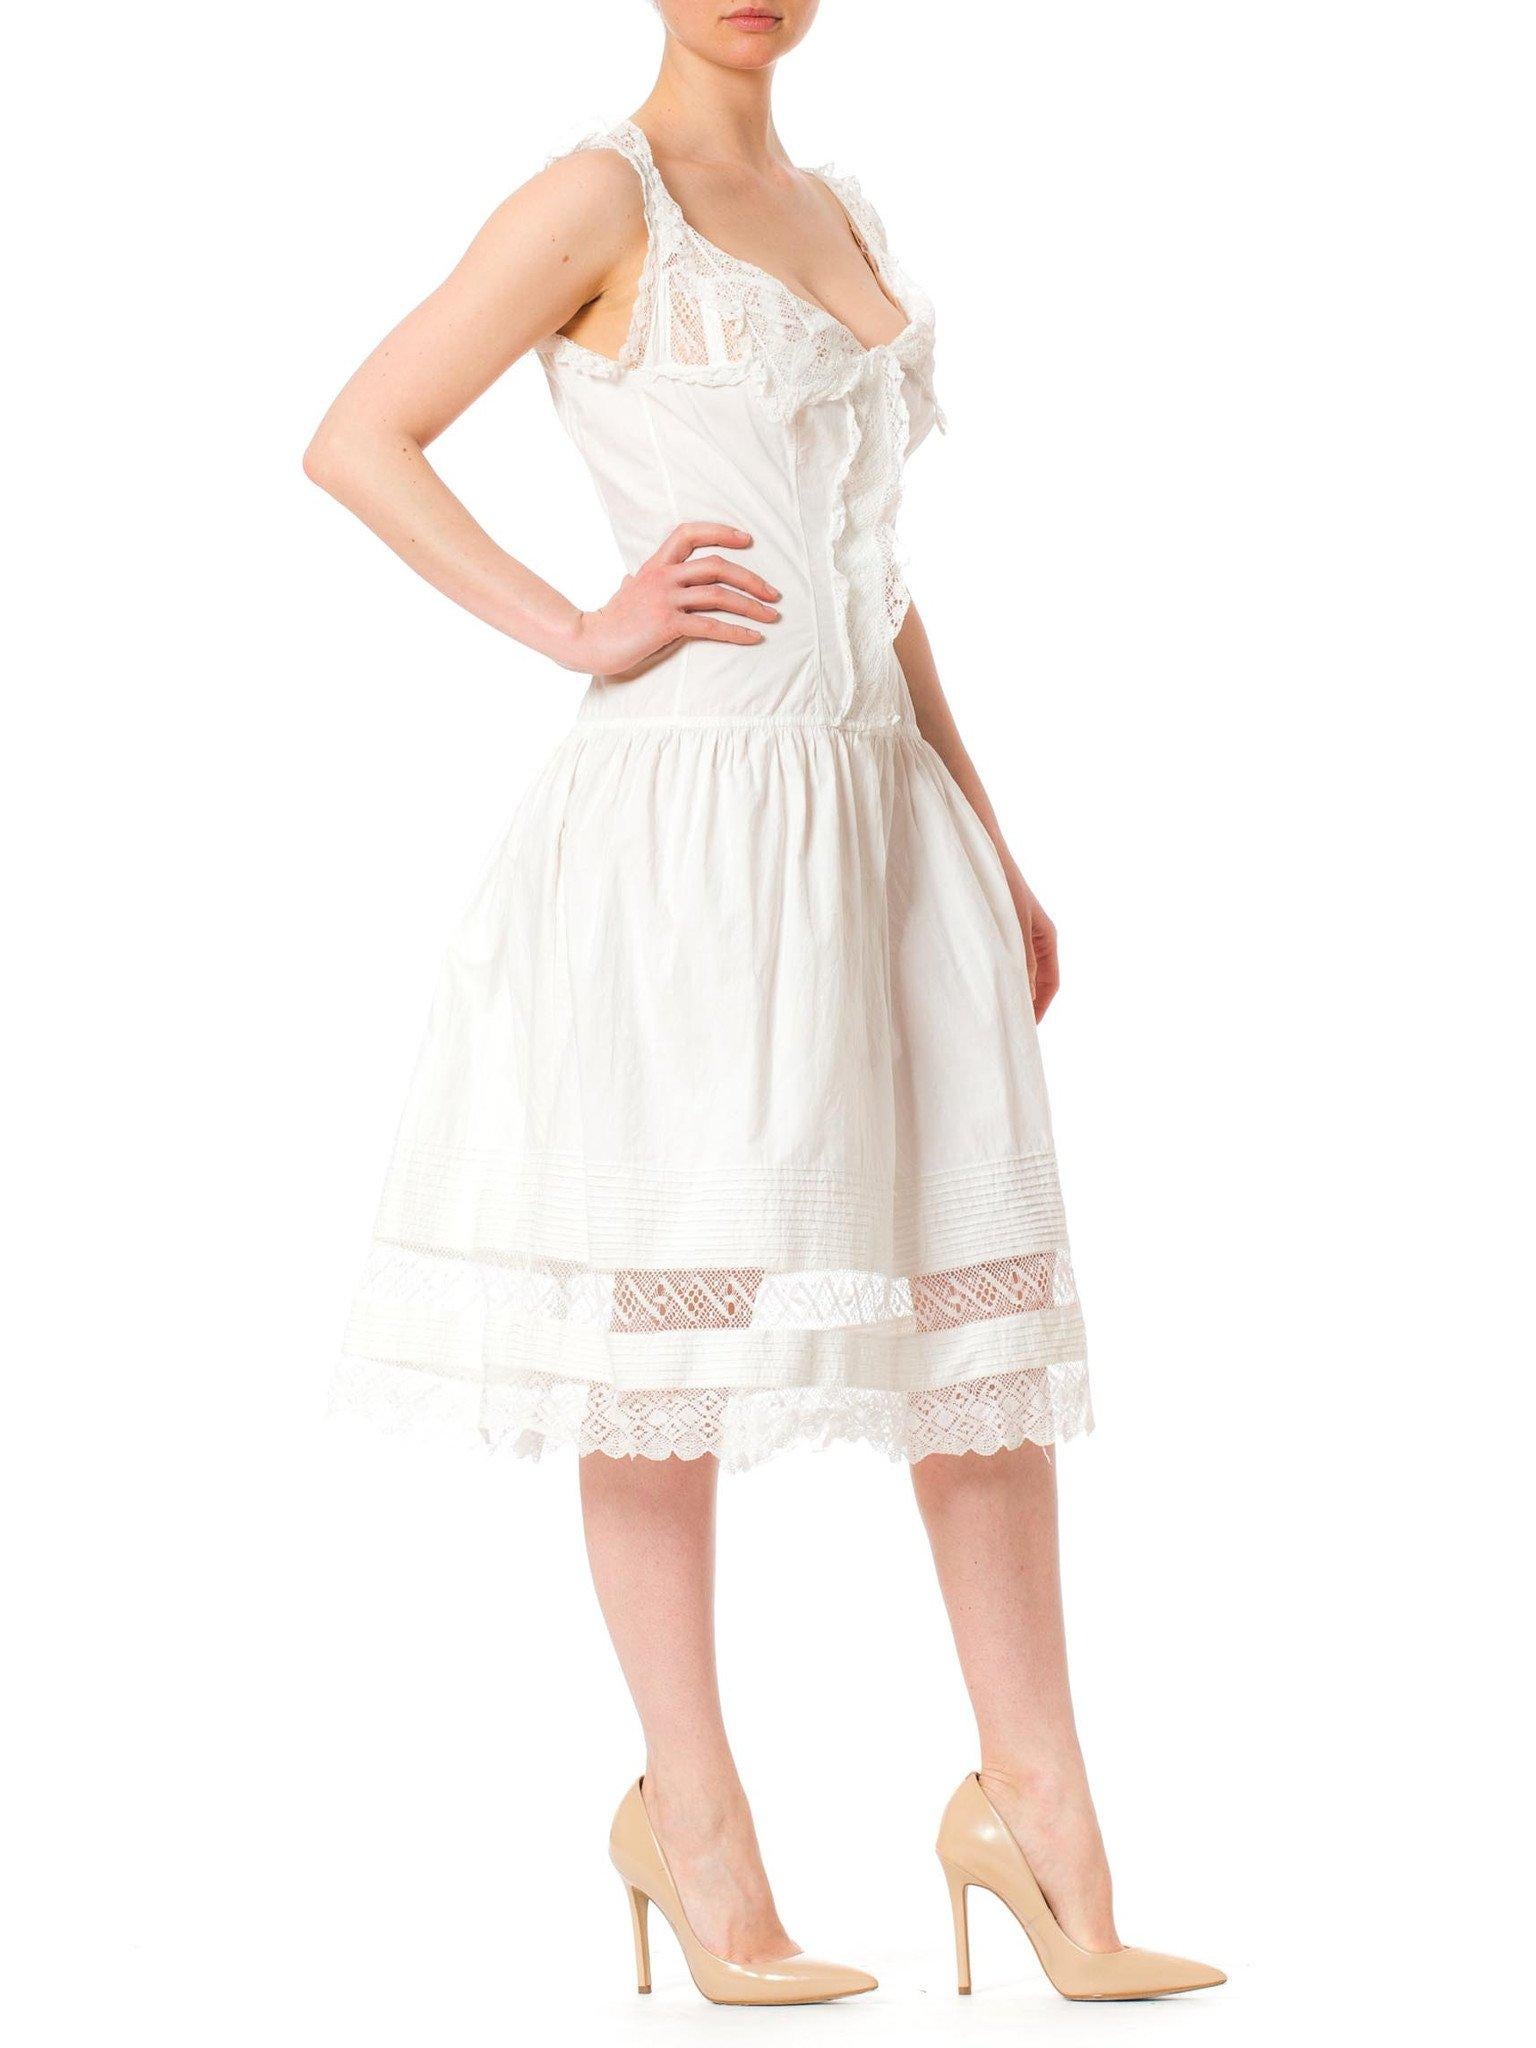 Victorian White Organic Cotton & Handmade Lace Chemise Corset Cover Dress In Excellent Condition For Sale In New York, NY